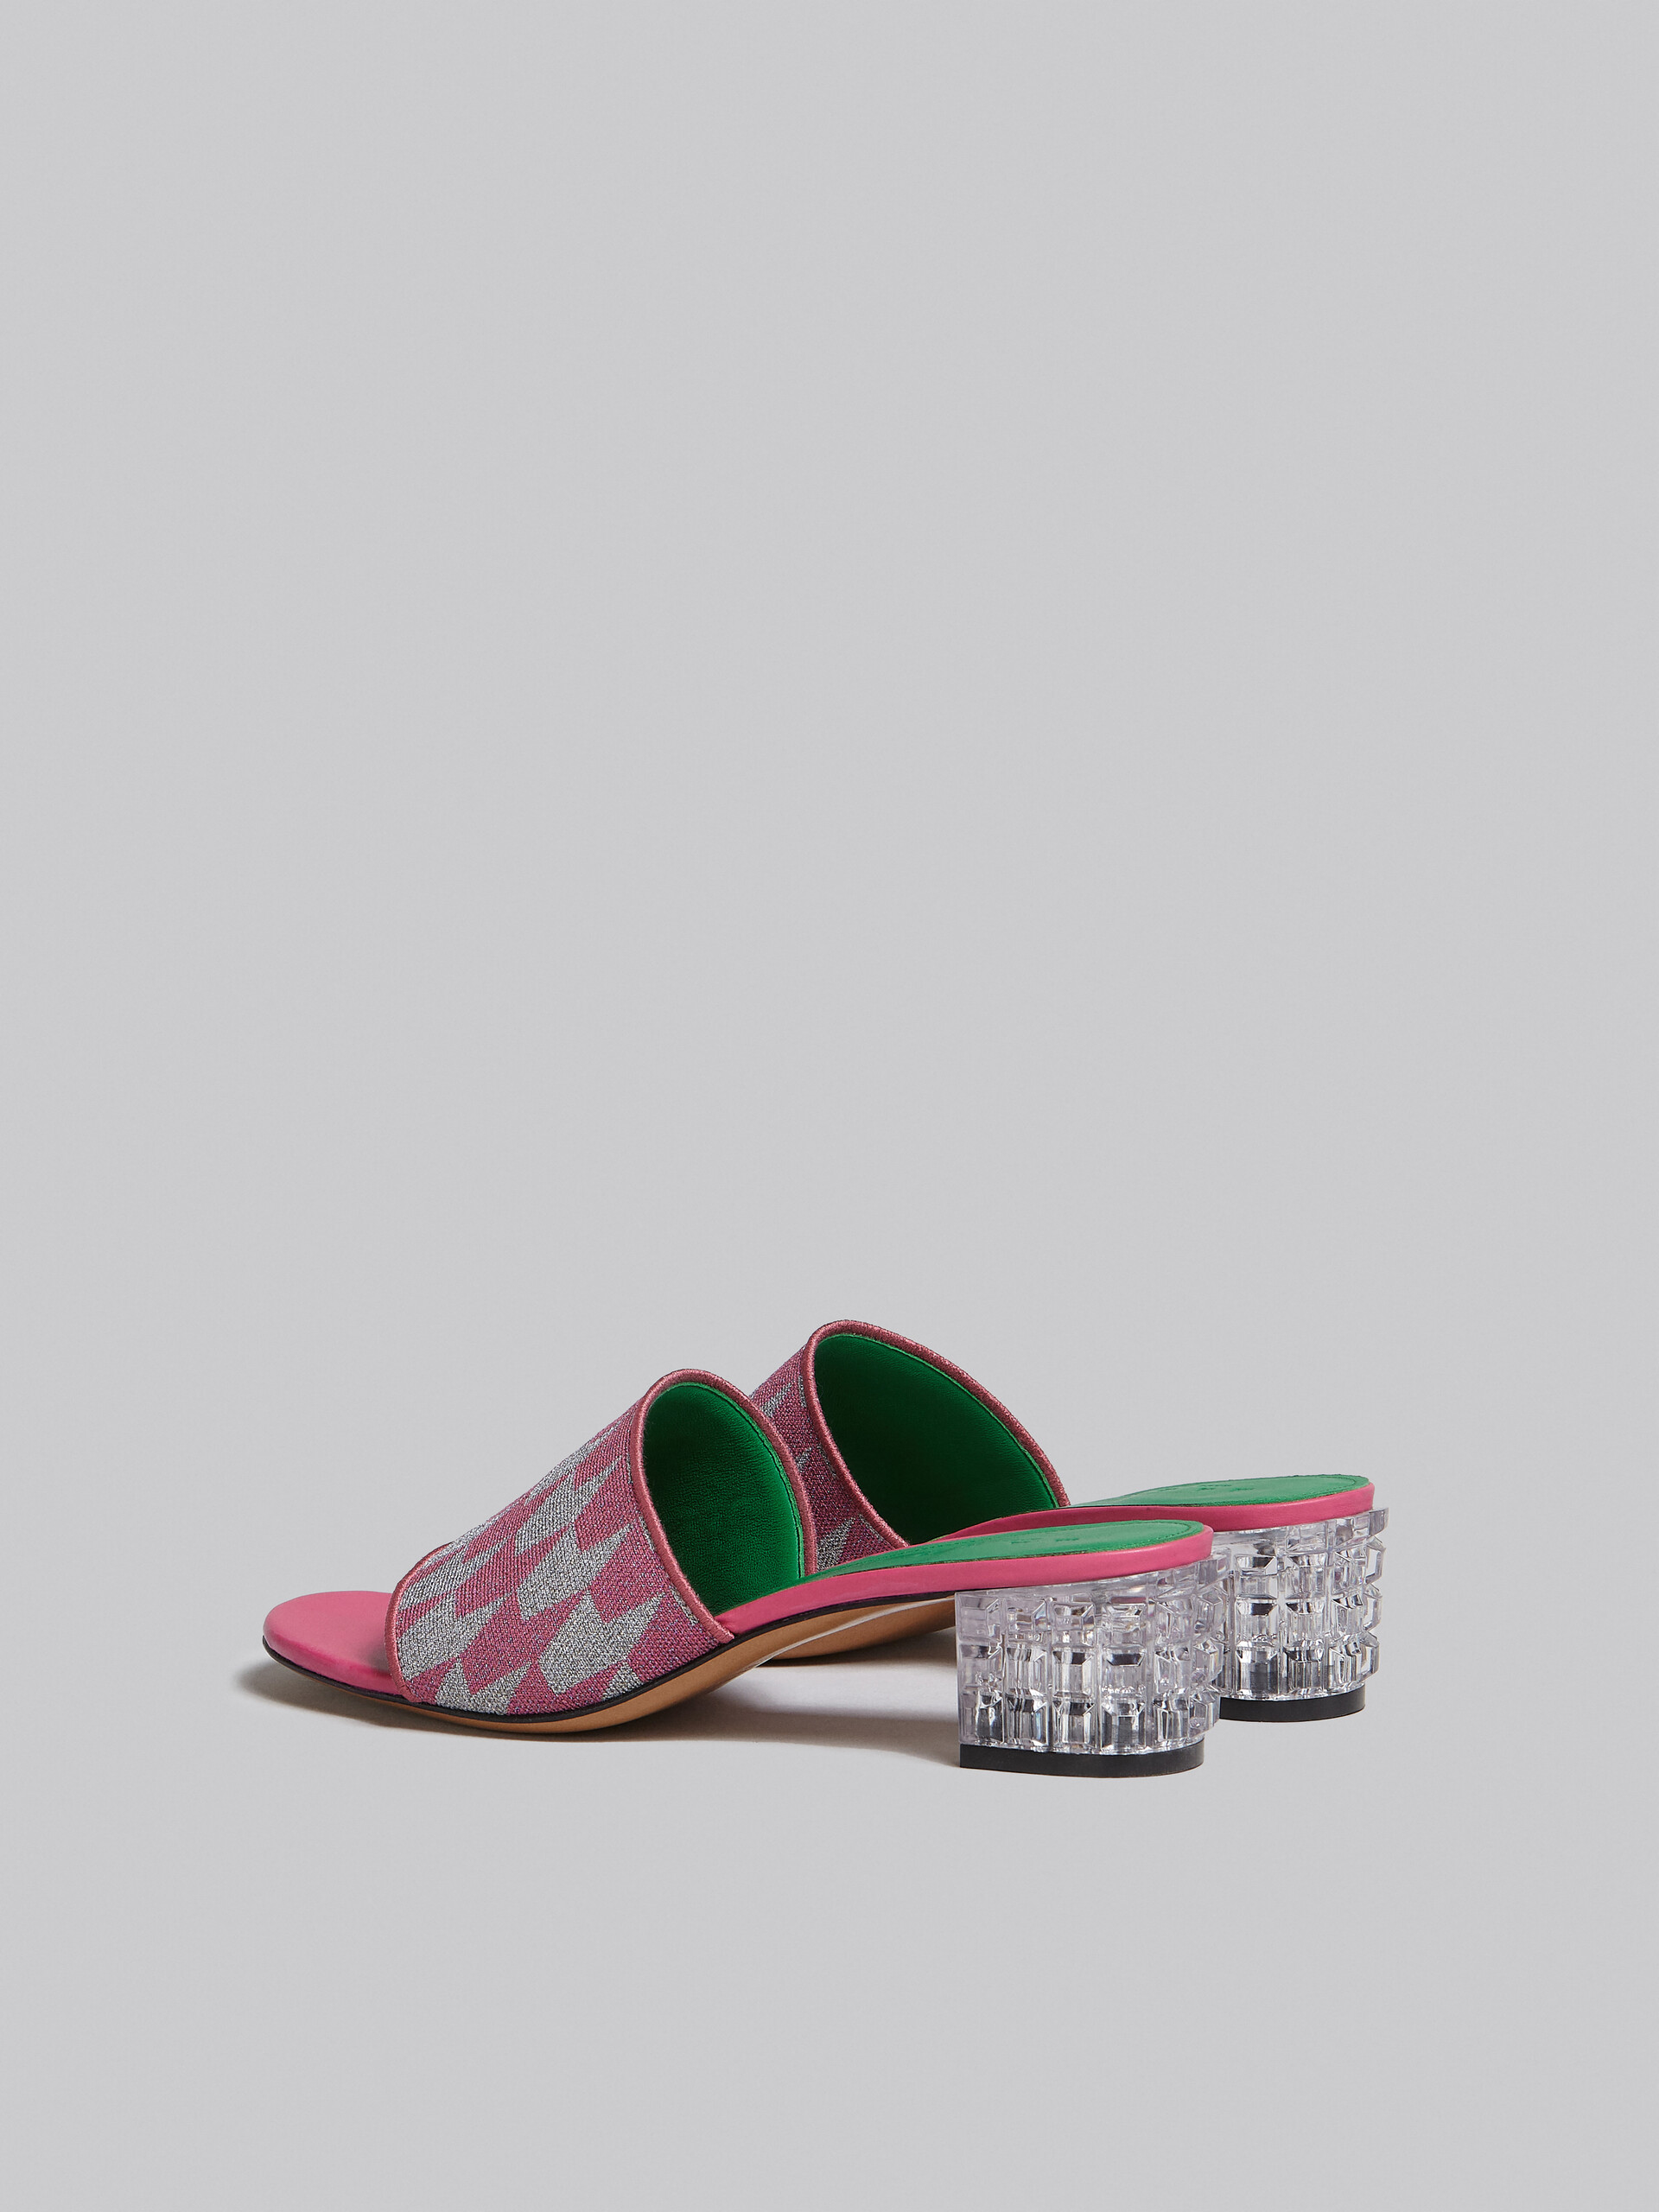 Lurex pink and silver sabot with houndstooth motif - Sandals - Image 3